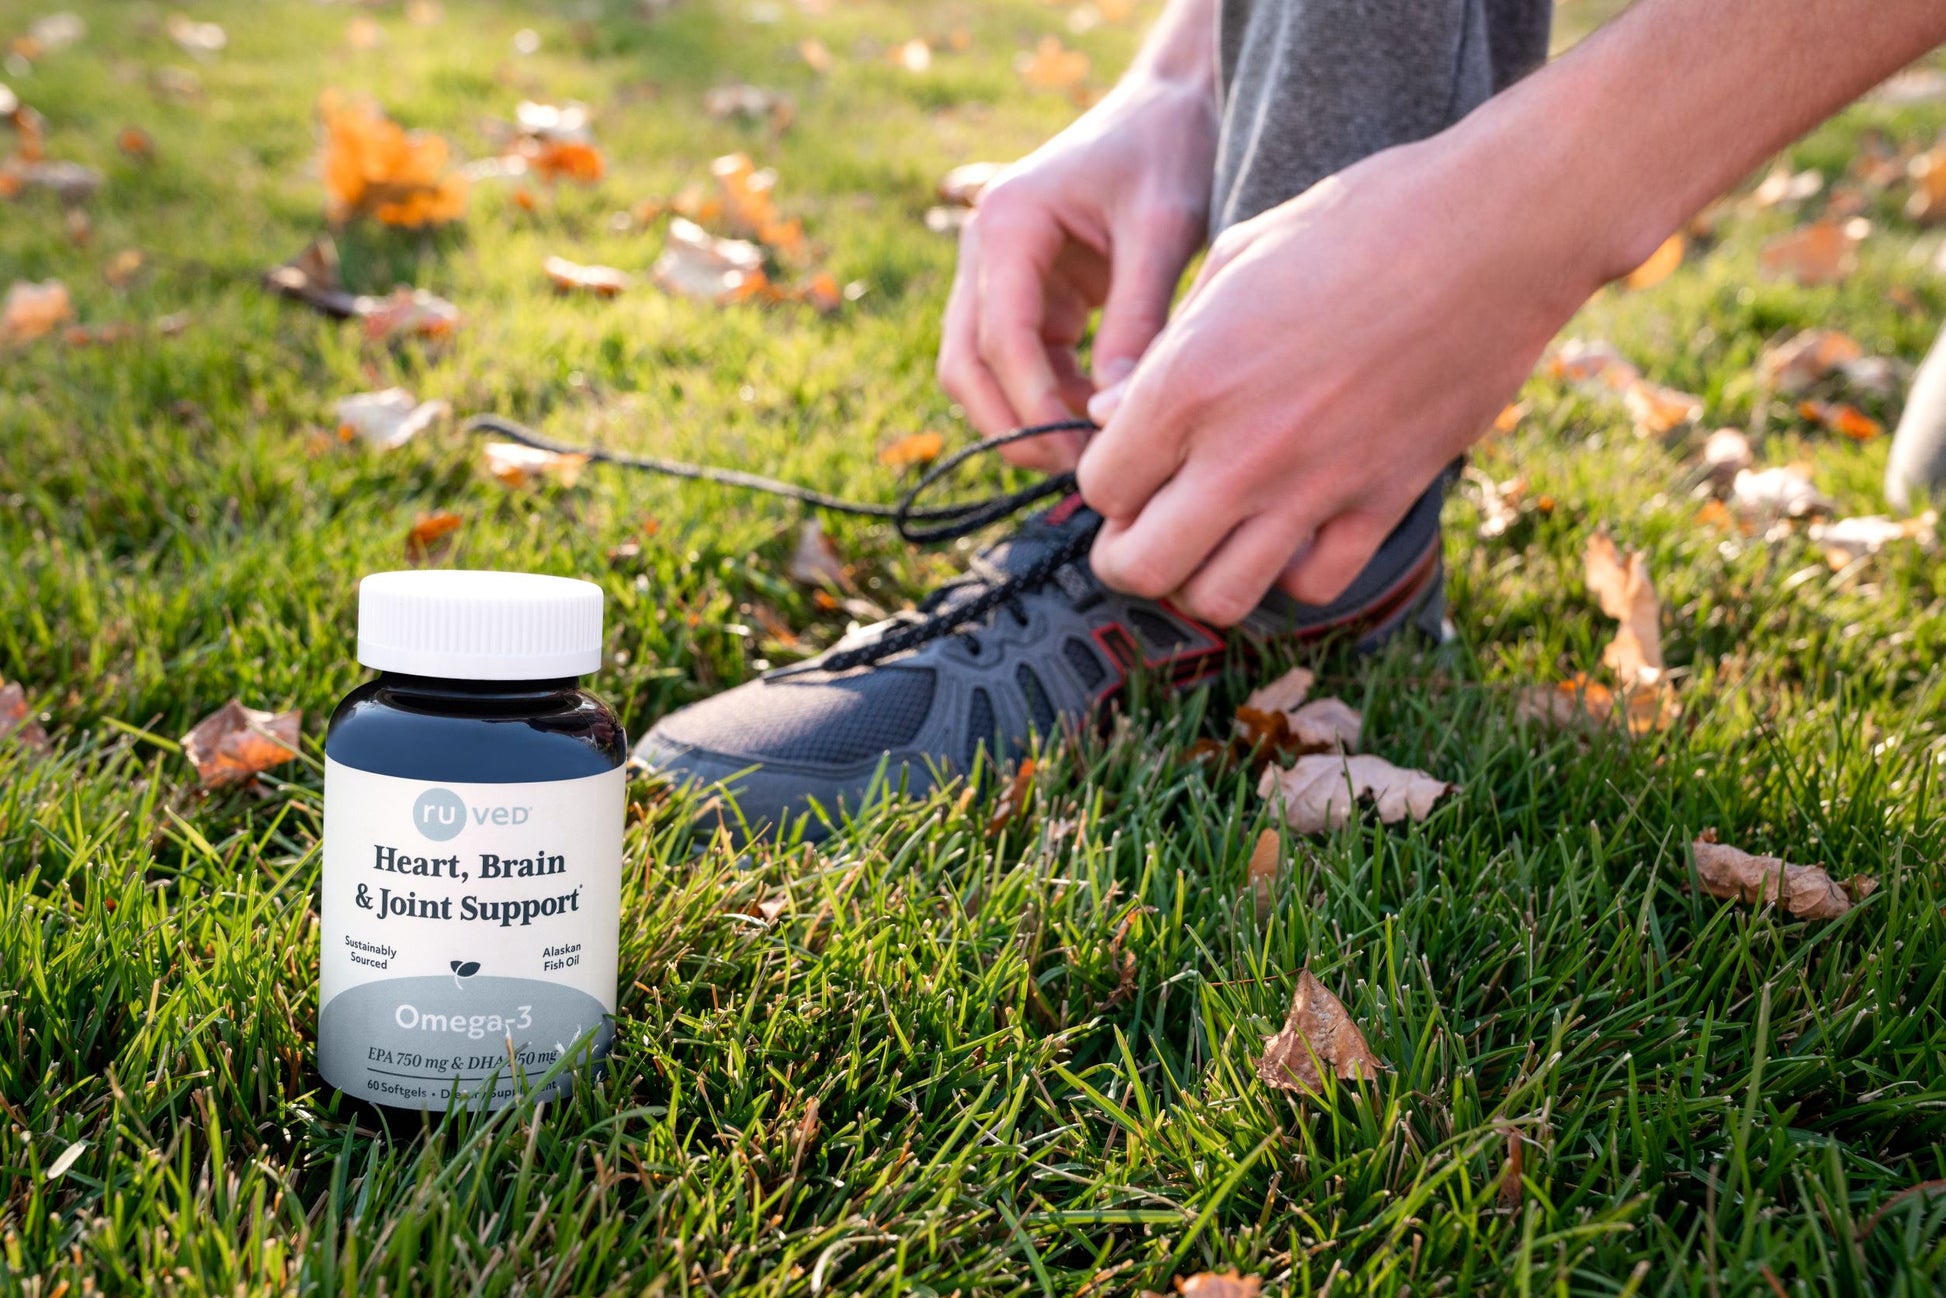 An Omega-3 bottle sitting next to a person tying their shoes.